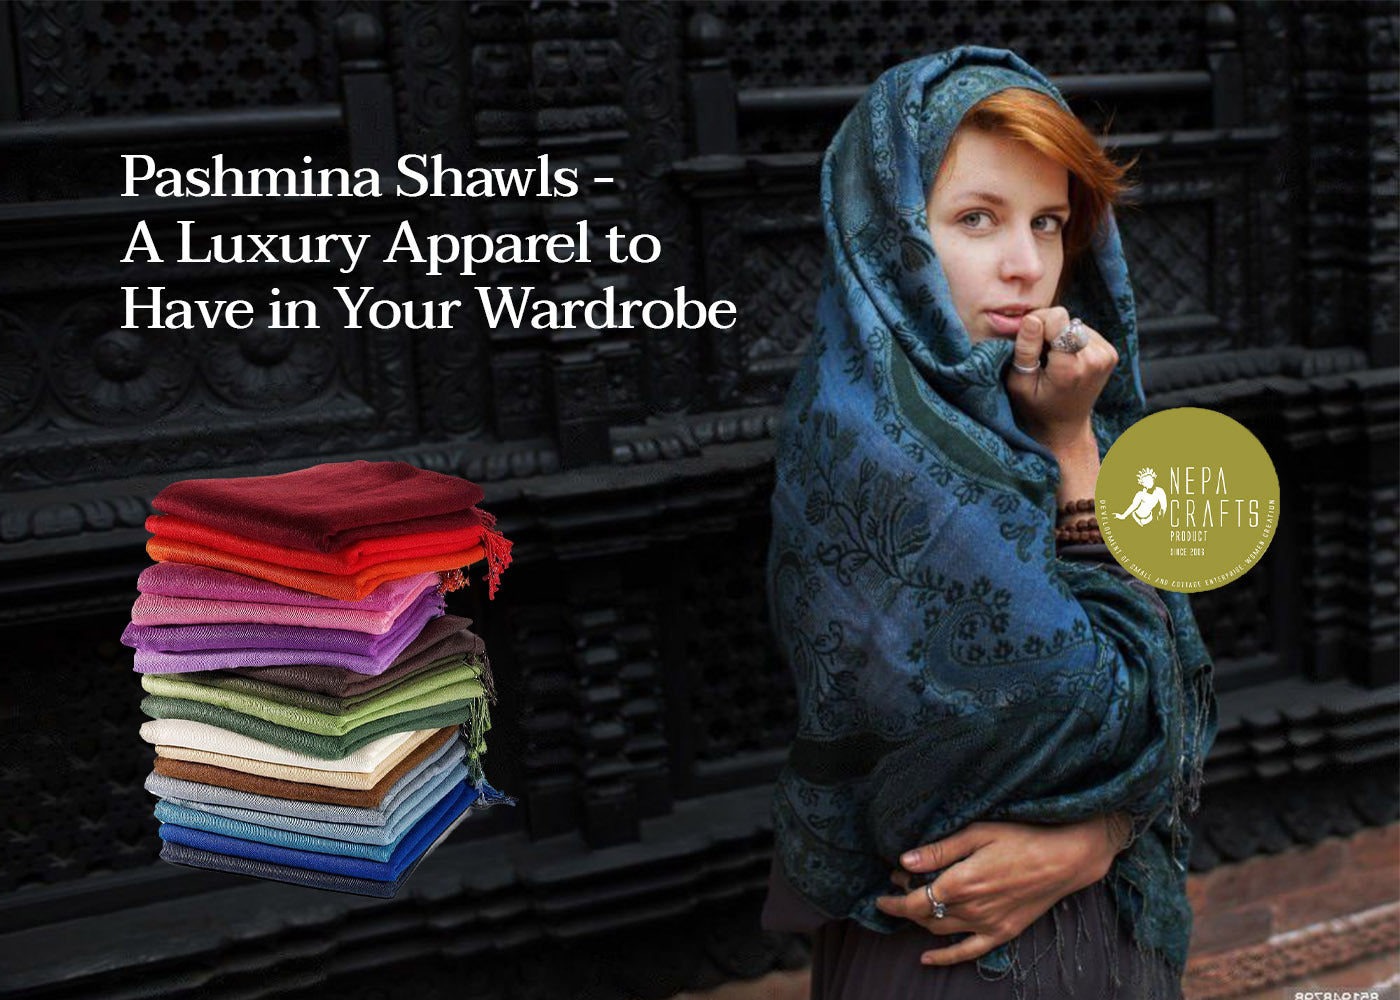 Pashmina Shawls - A Luxury Apparel to Have in Your Wardrobe